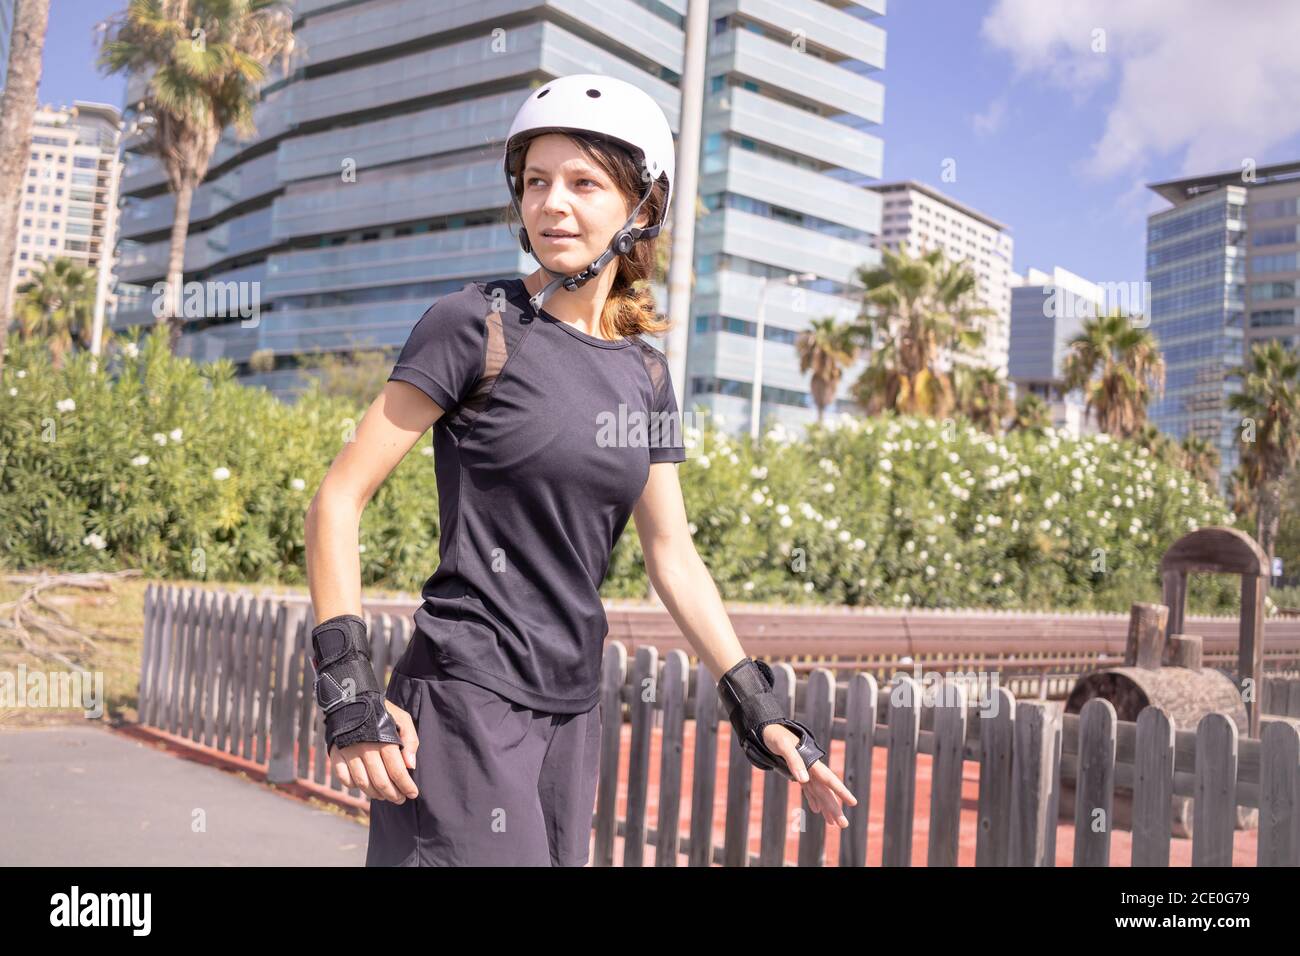 Young roller skater caucasian woman in the white helmet and black sporty clothes, sunny day, skatepark, urban environment. Stock Photo